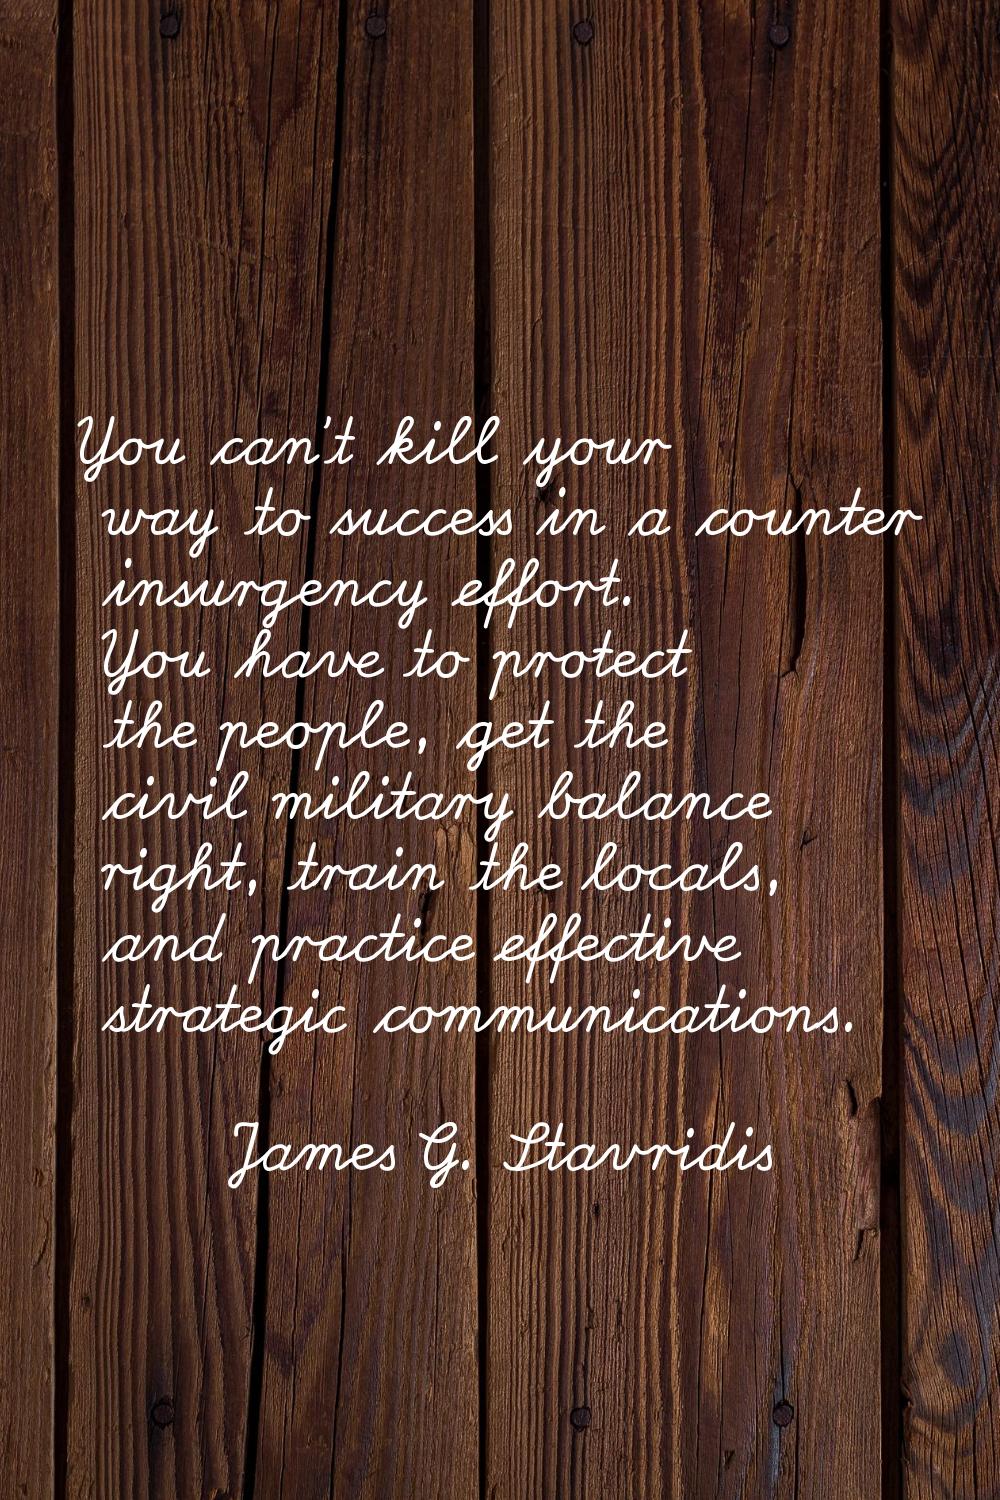 You can't kill your way to success in a counter insurgency effort. You have to protect the people, 